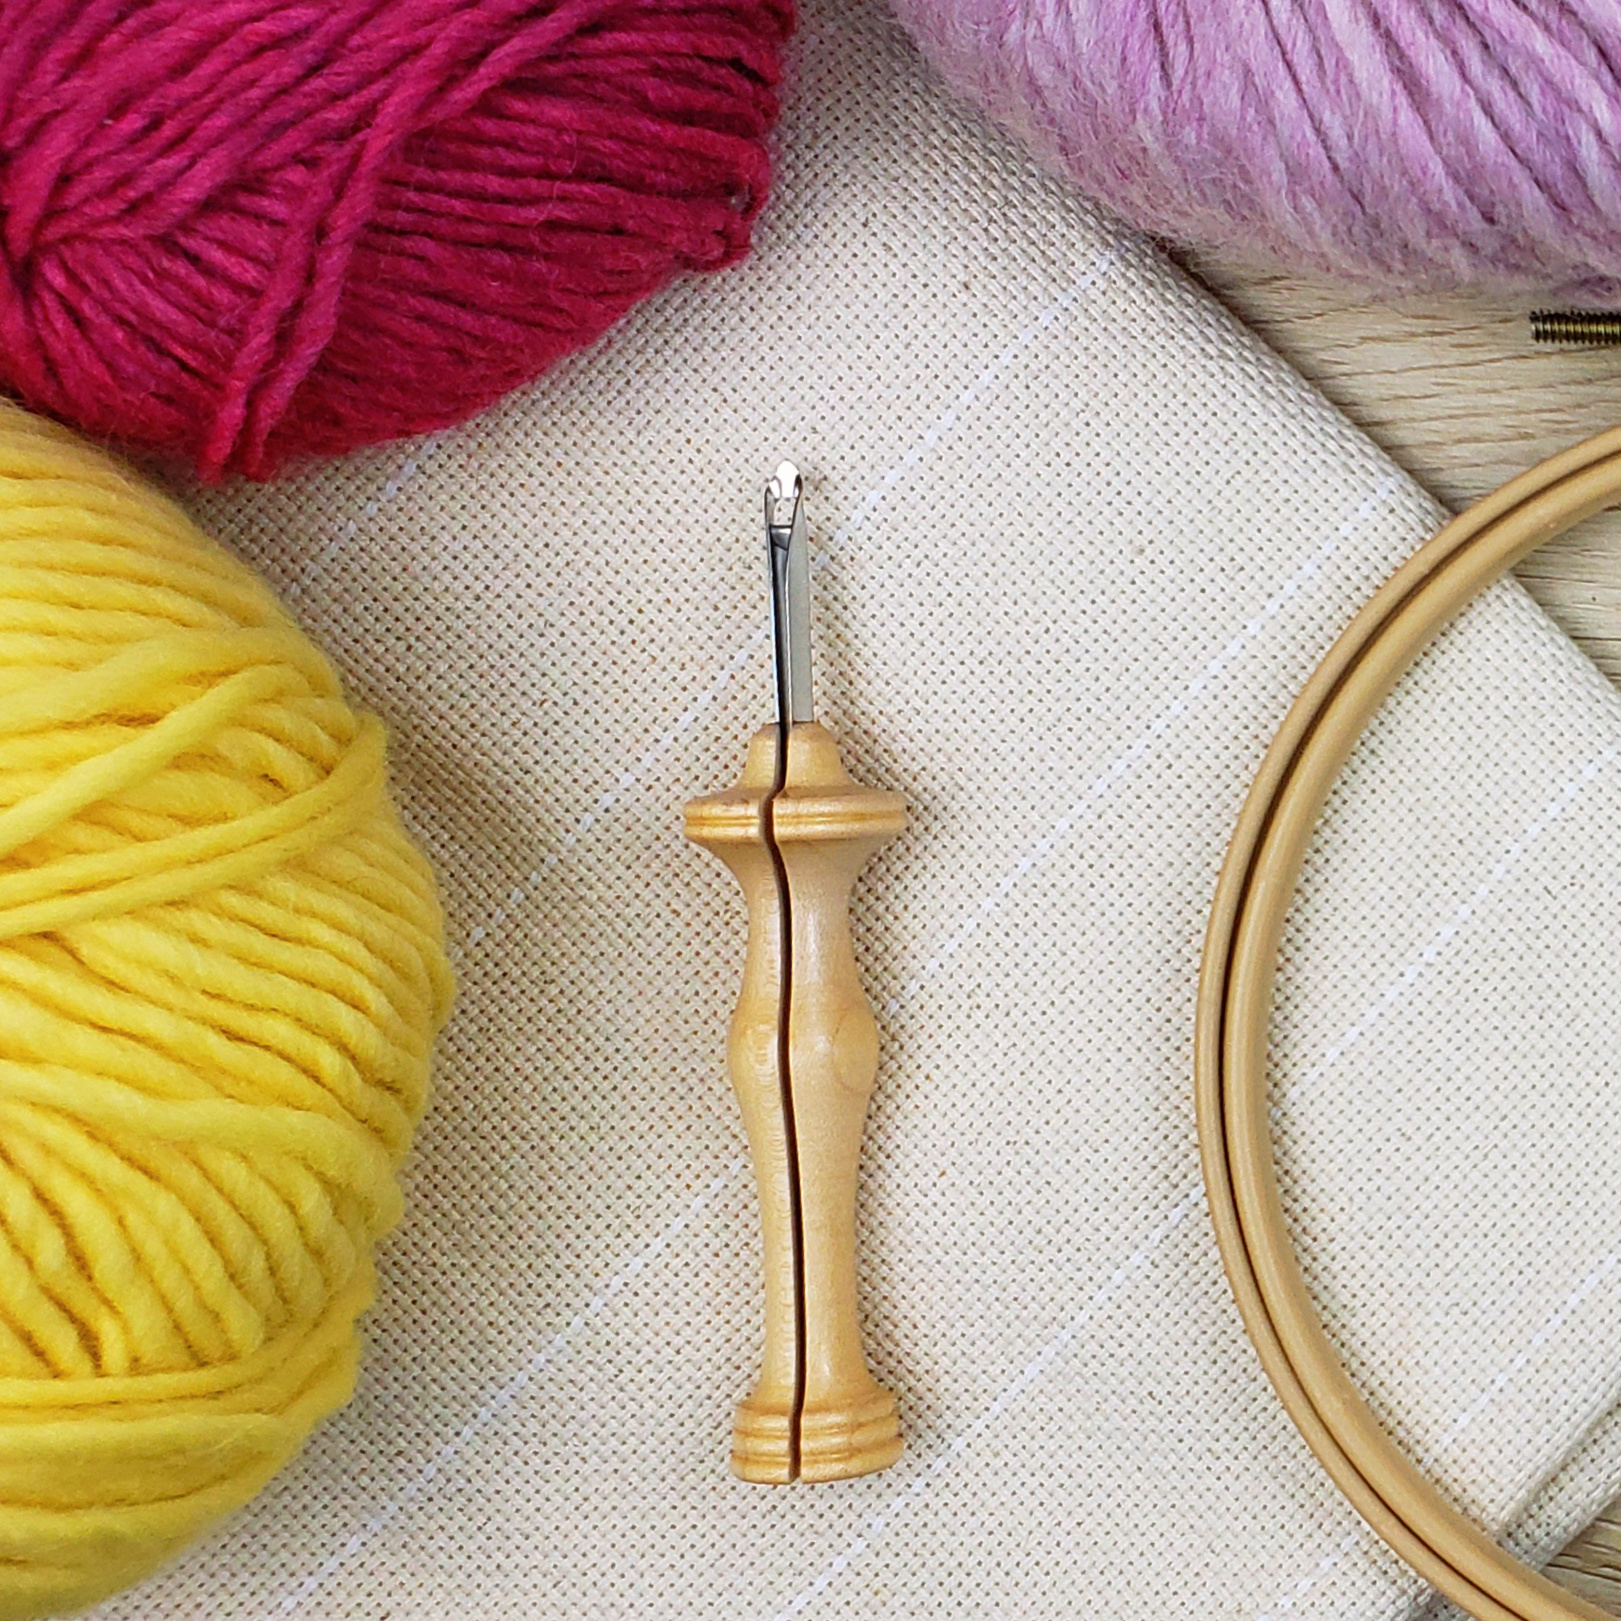 Oxford punch needle, yarn, embroidery hoop, and monk's cloth